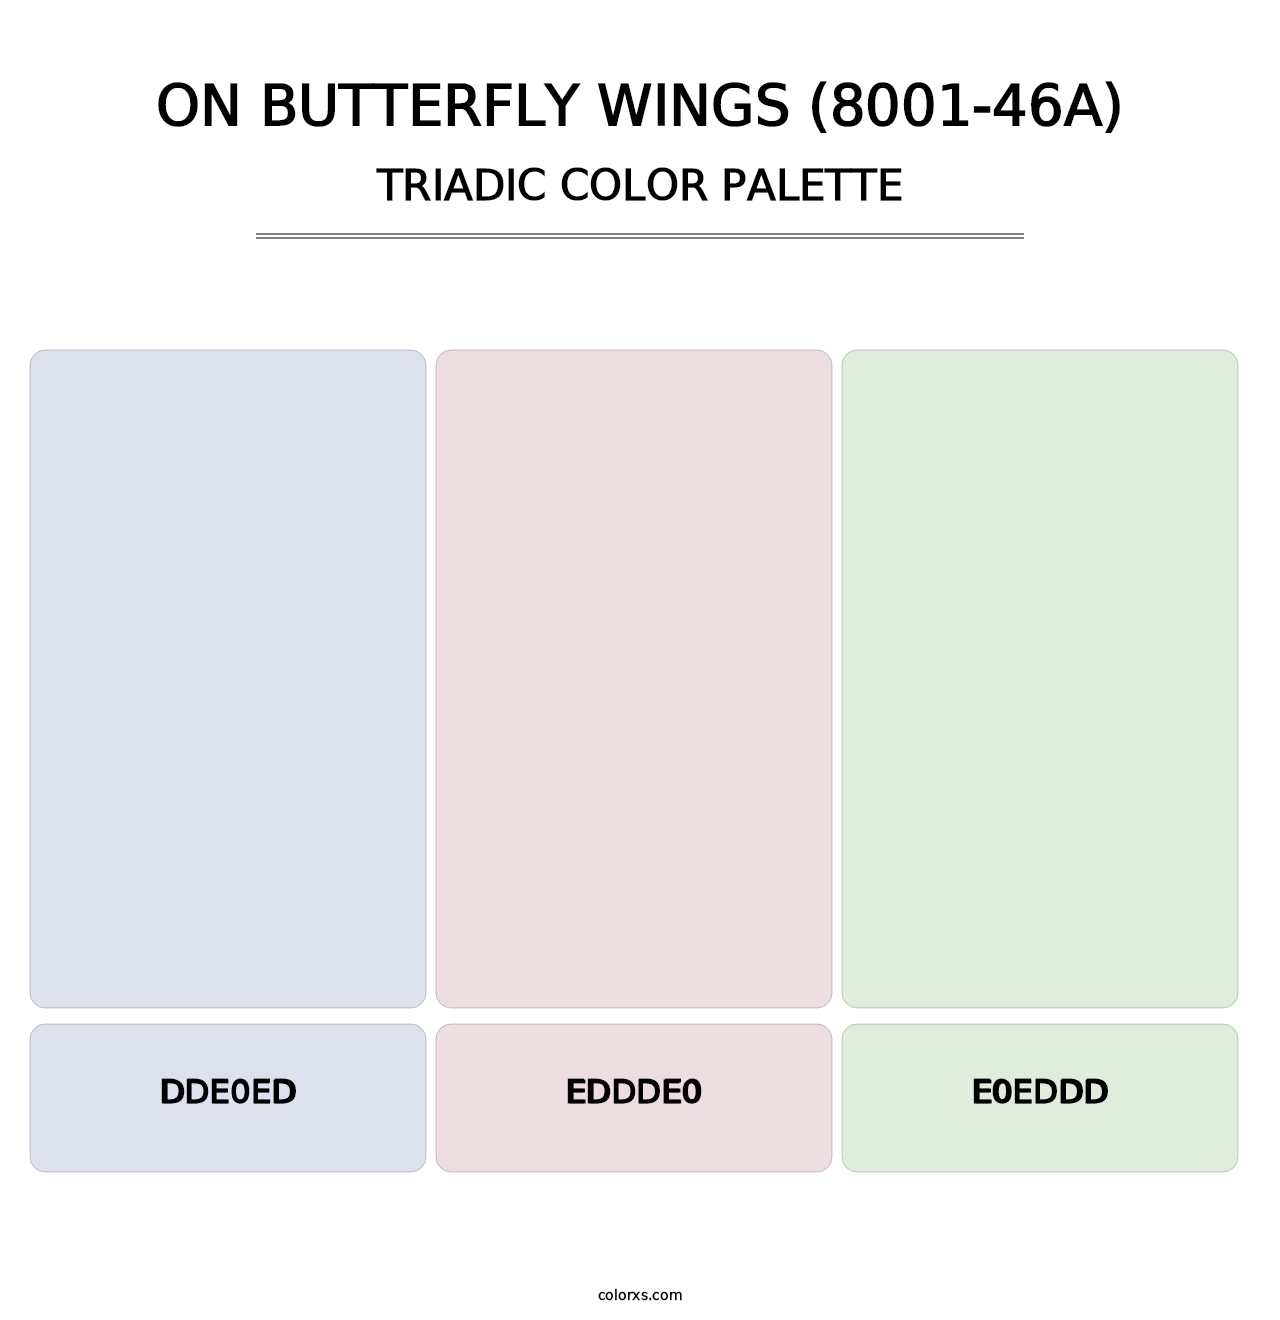 On Butterfly Wings (8001-46A) - Triadic Color Palette